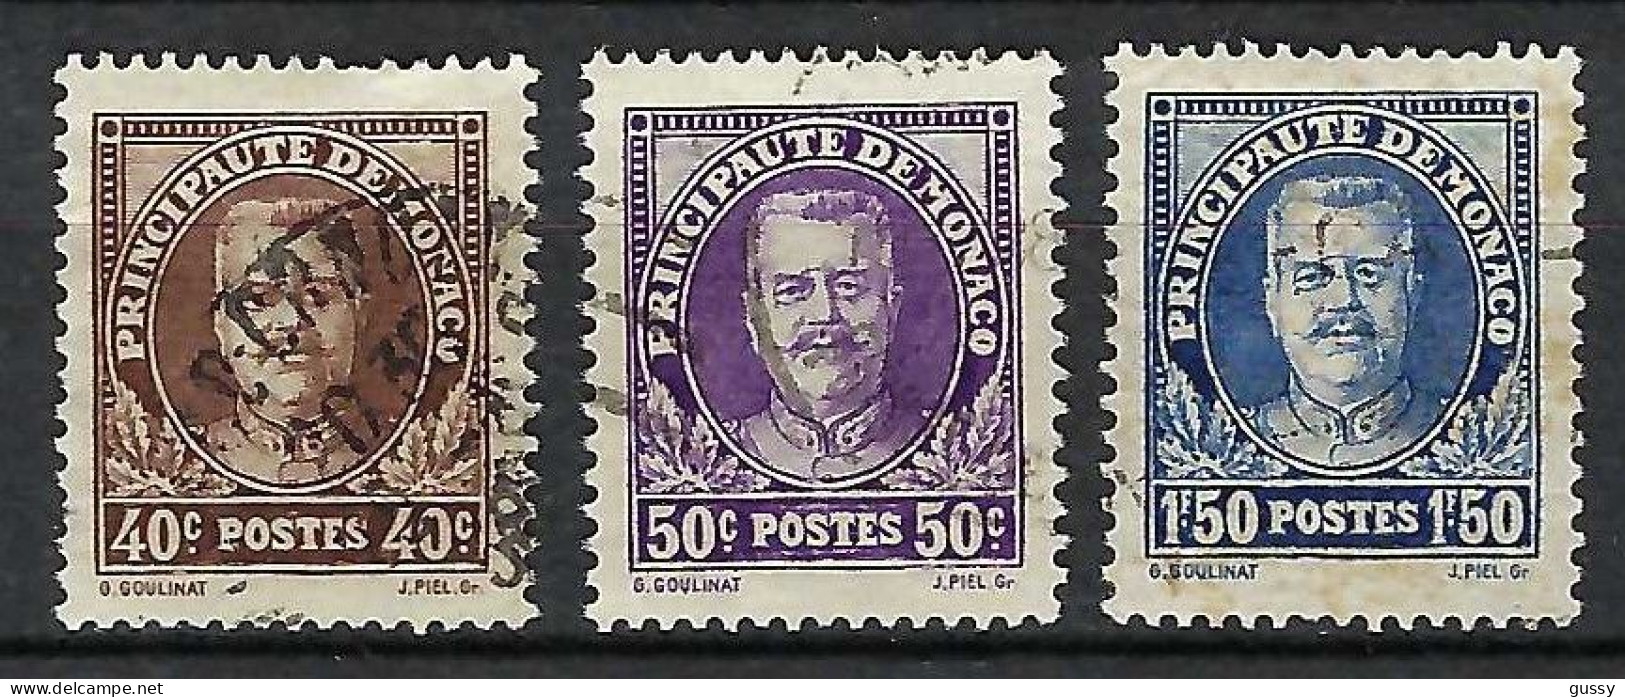 MONACO 1933:  Lot D' Obl. - Used Stamps